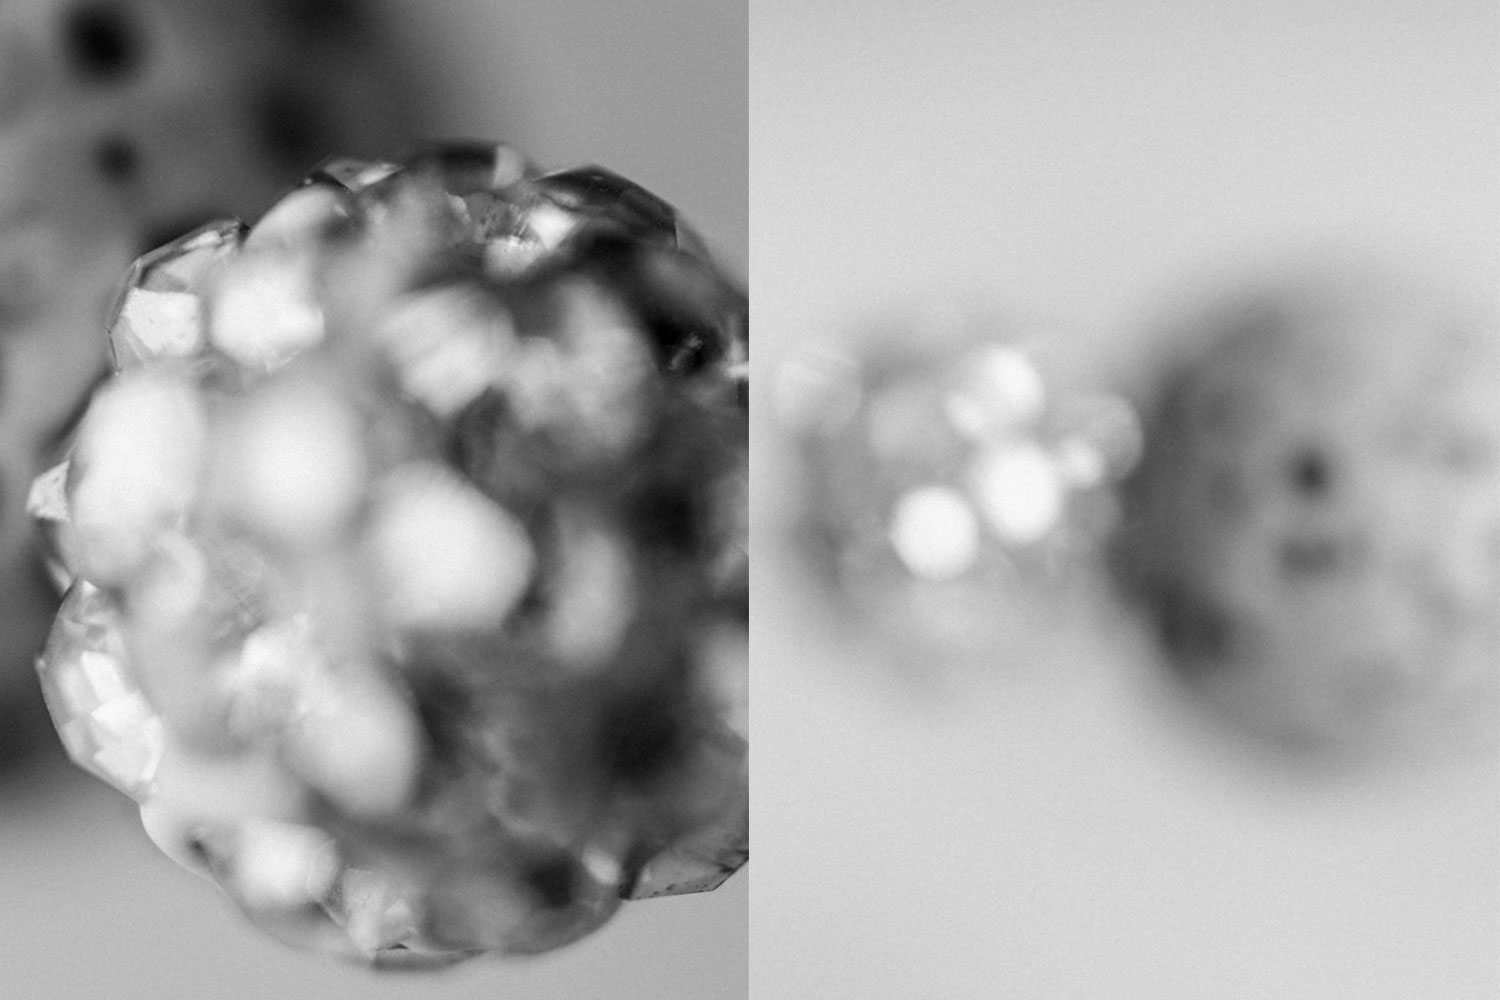 Fine art spheres in black and white. Imagery features a found glittery decorative pin.